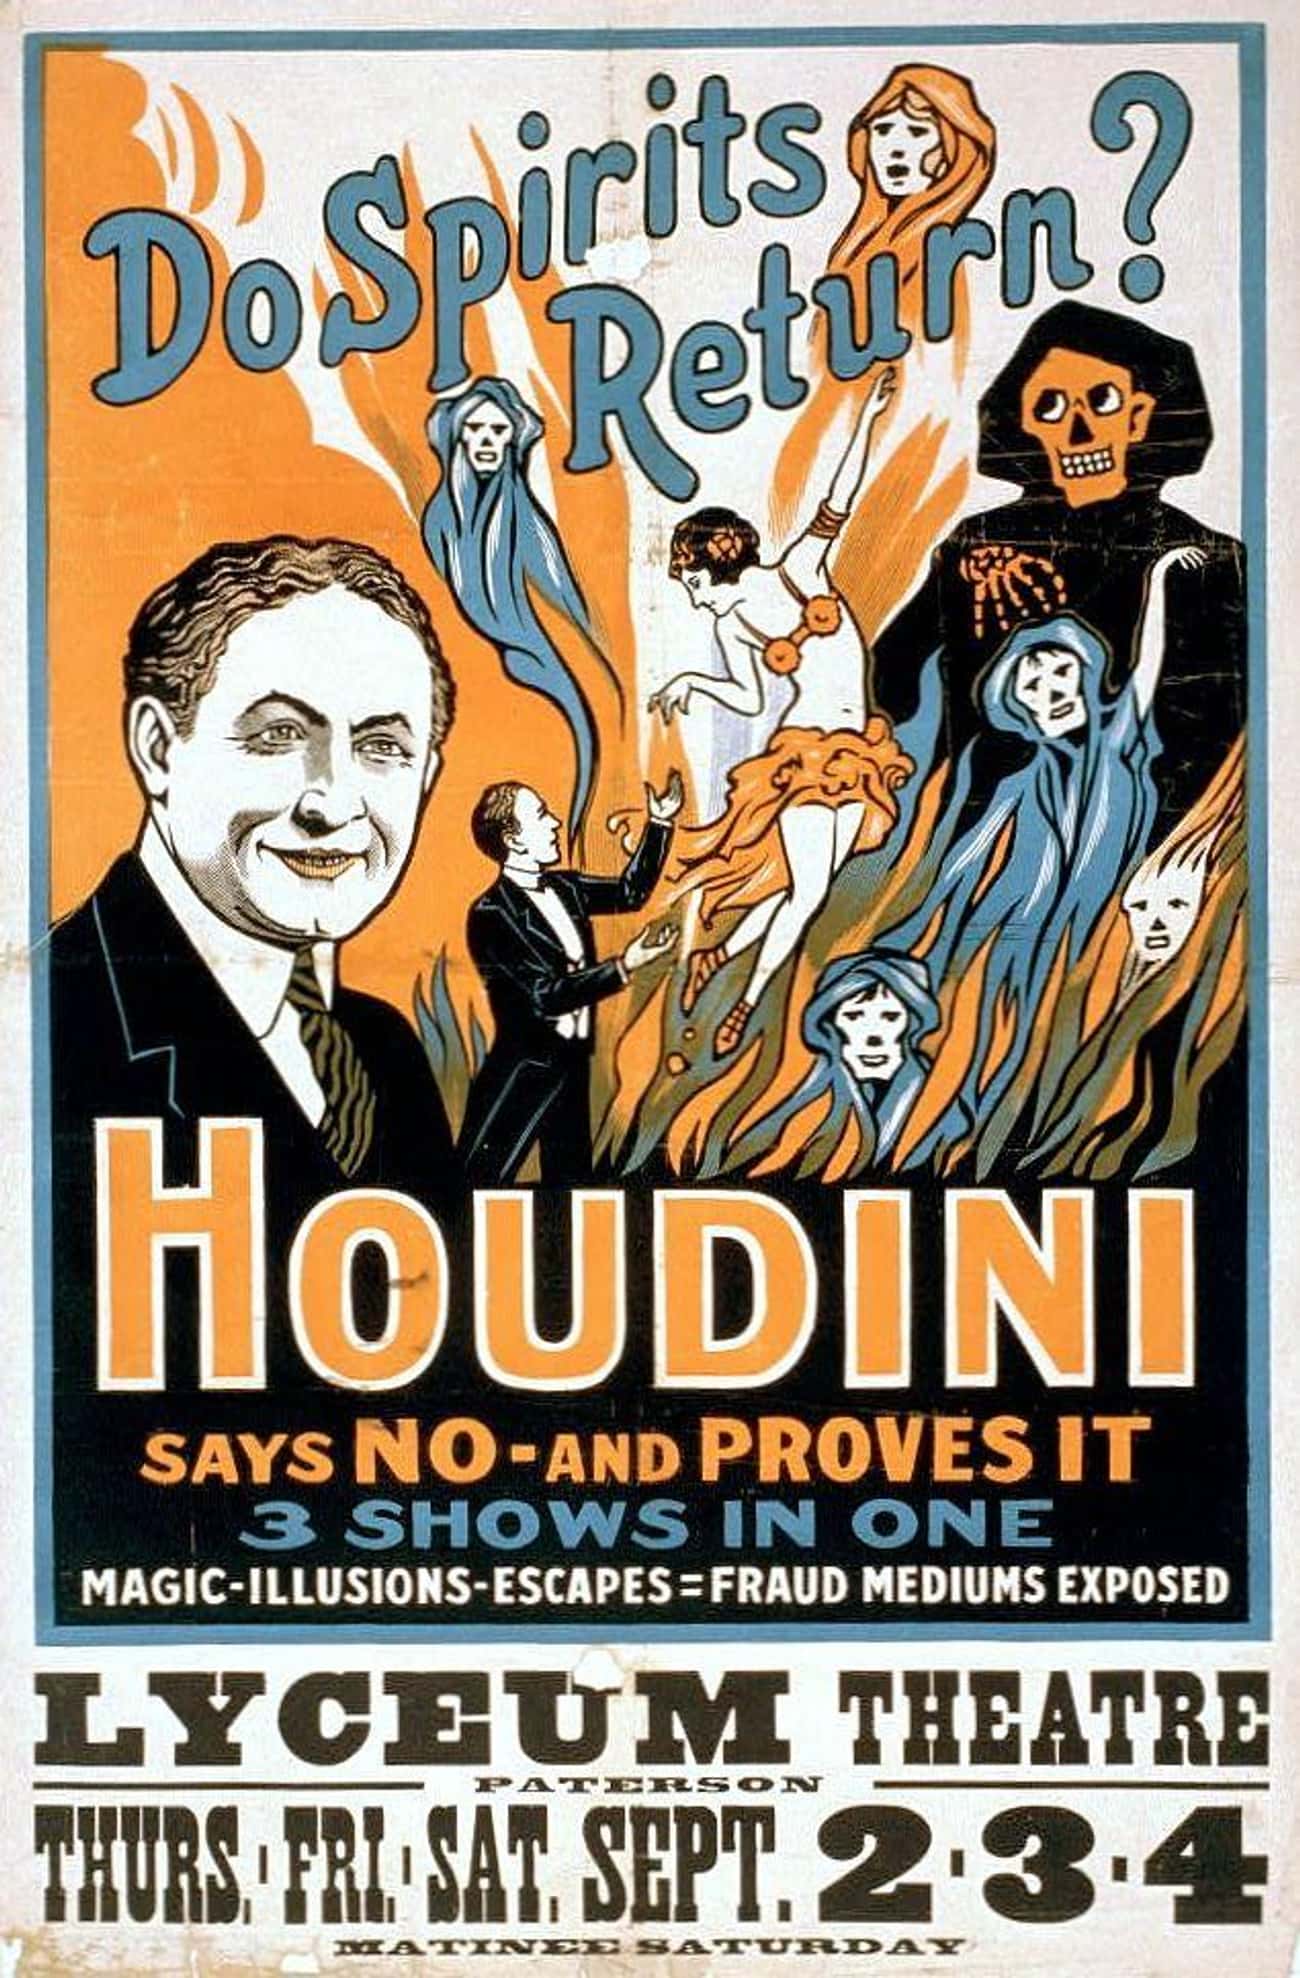 'Scientific American' Started A Contest Offering $2,500 To Any Genuine Medium And Selected Houdini As An Arbiter